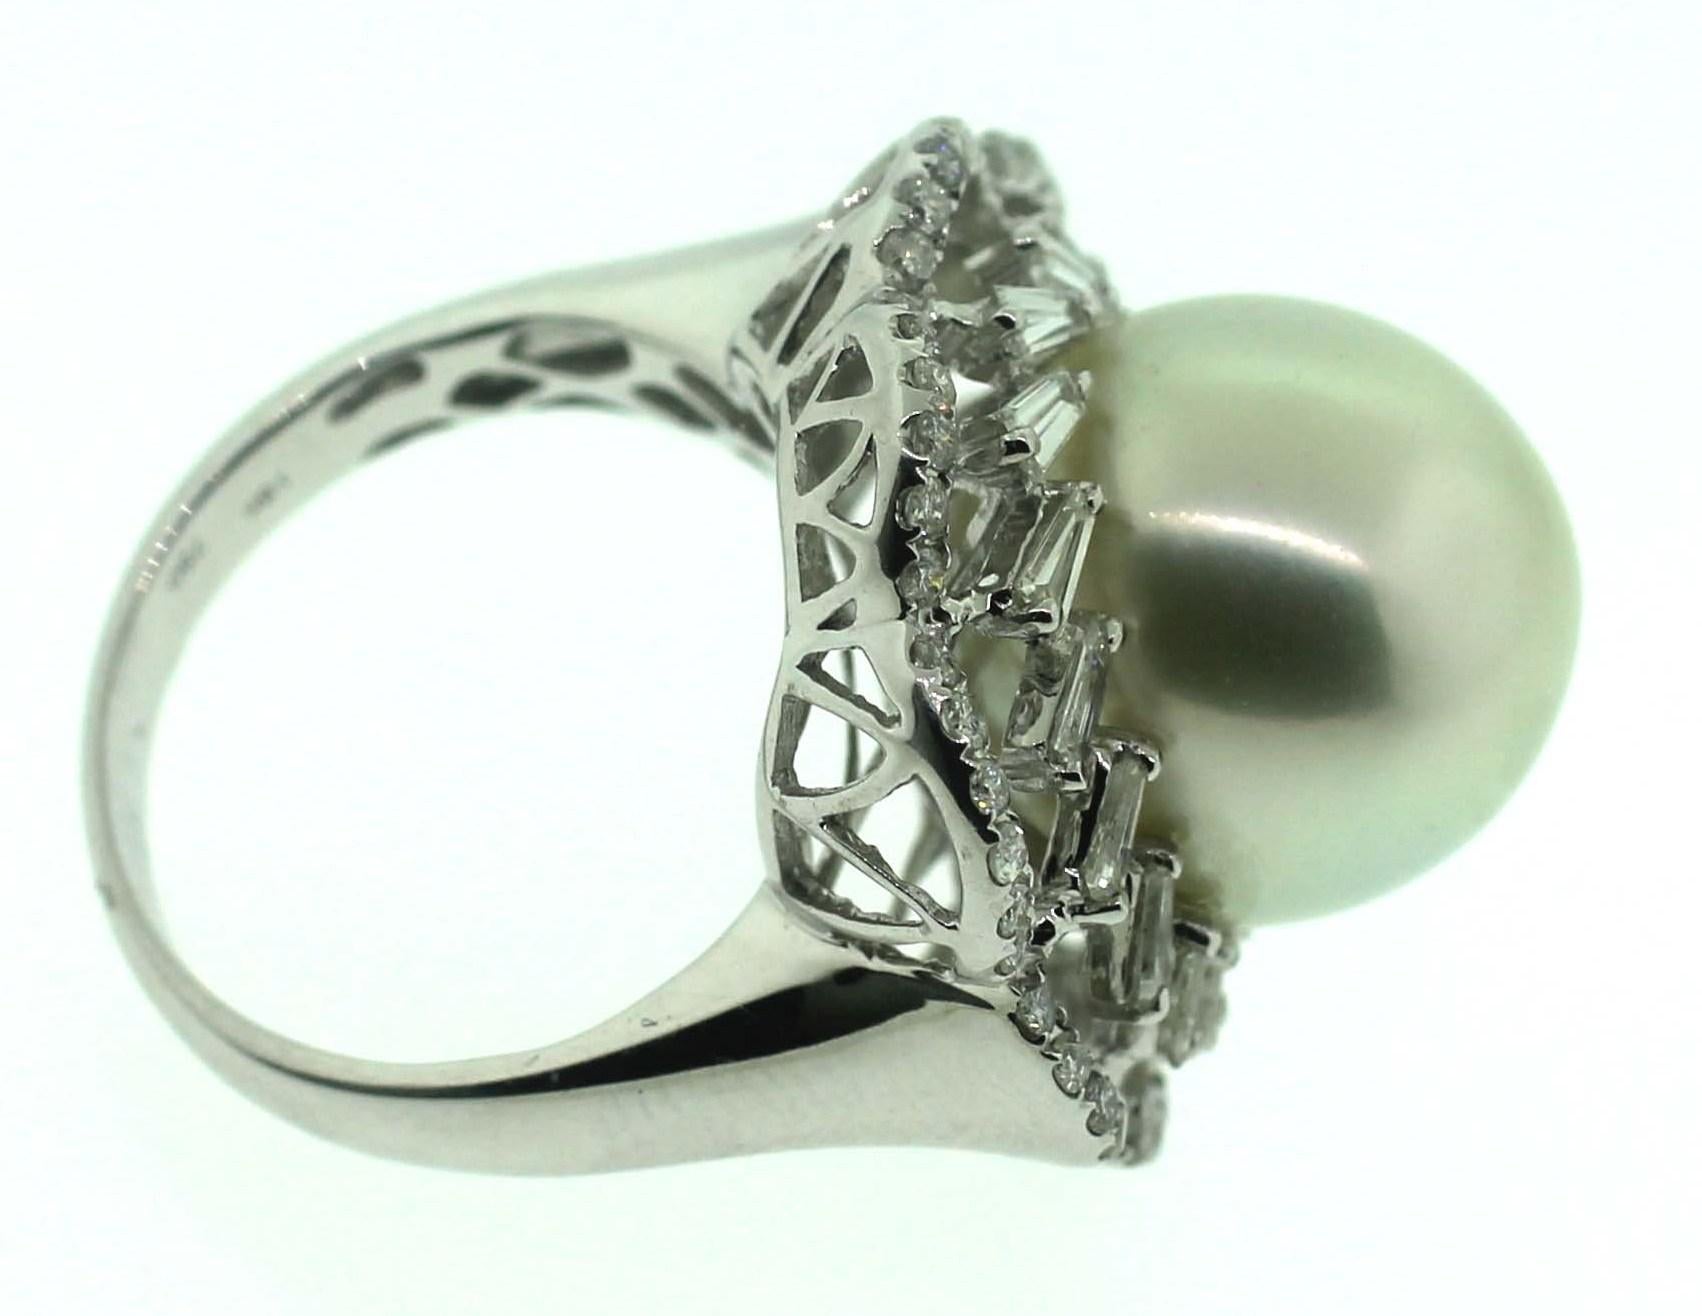 Bead Hakimoto 18K White Gold & Diamonds 14.5 mm South Sea Pearl Cocktail Ring For Sale